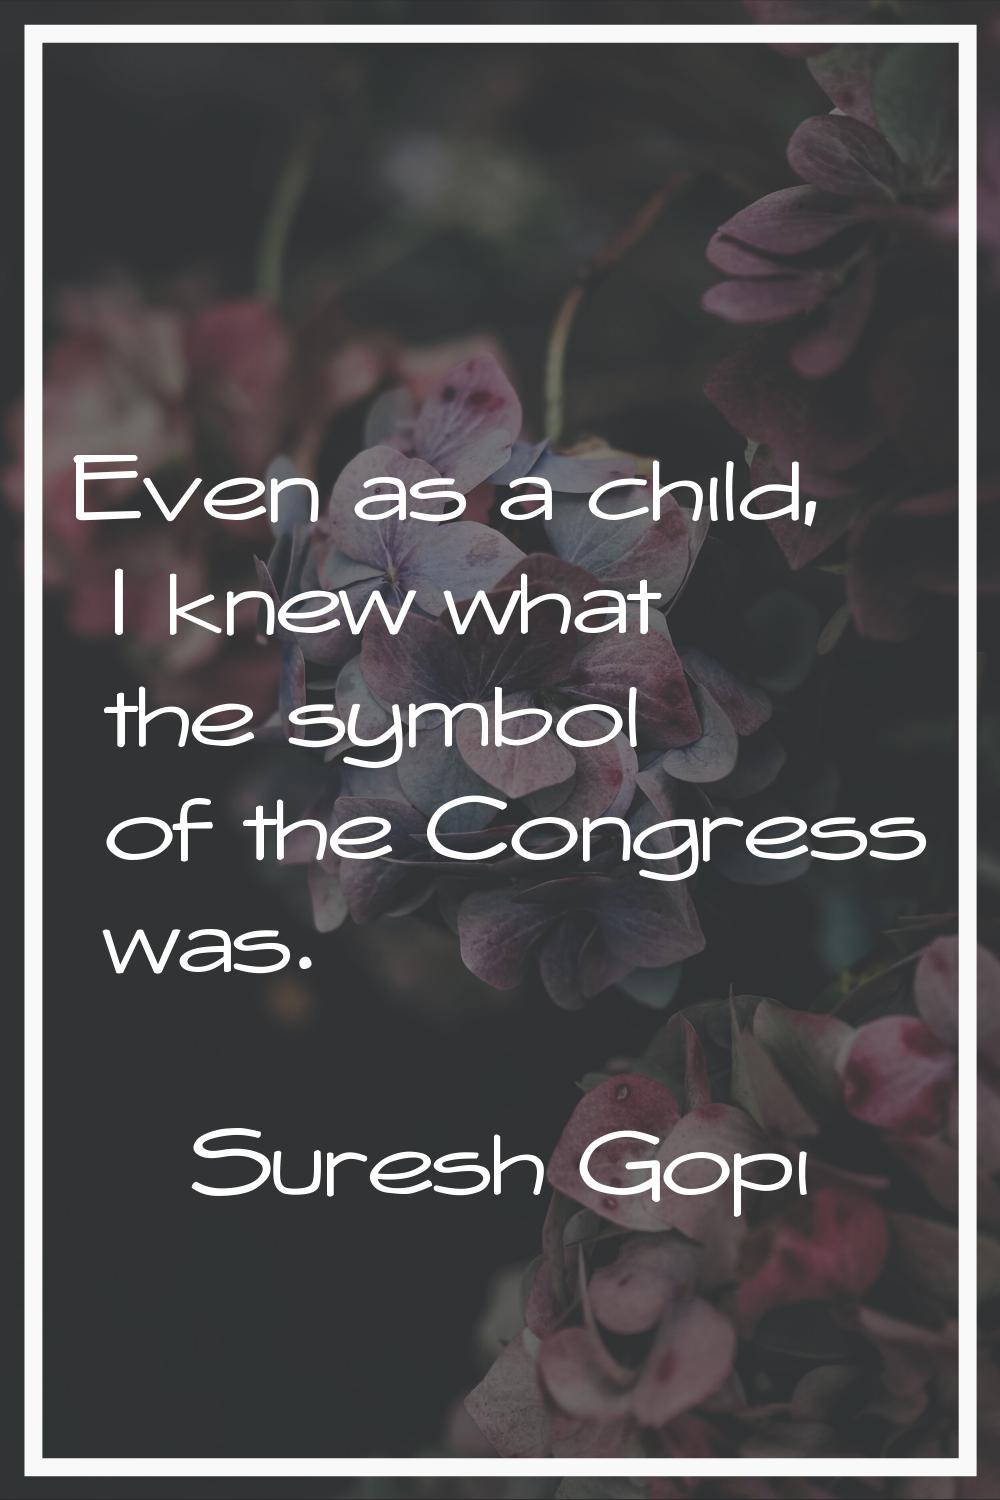 Even as a child, I knew what the symbol of the Congress was.